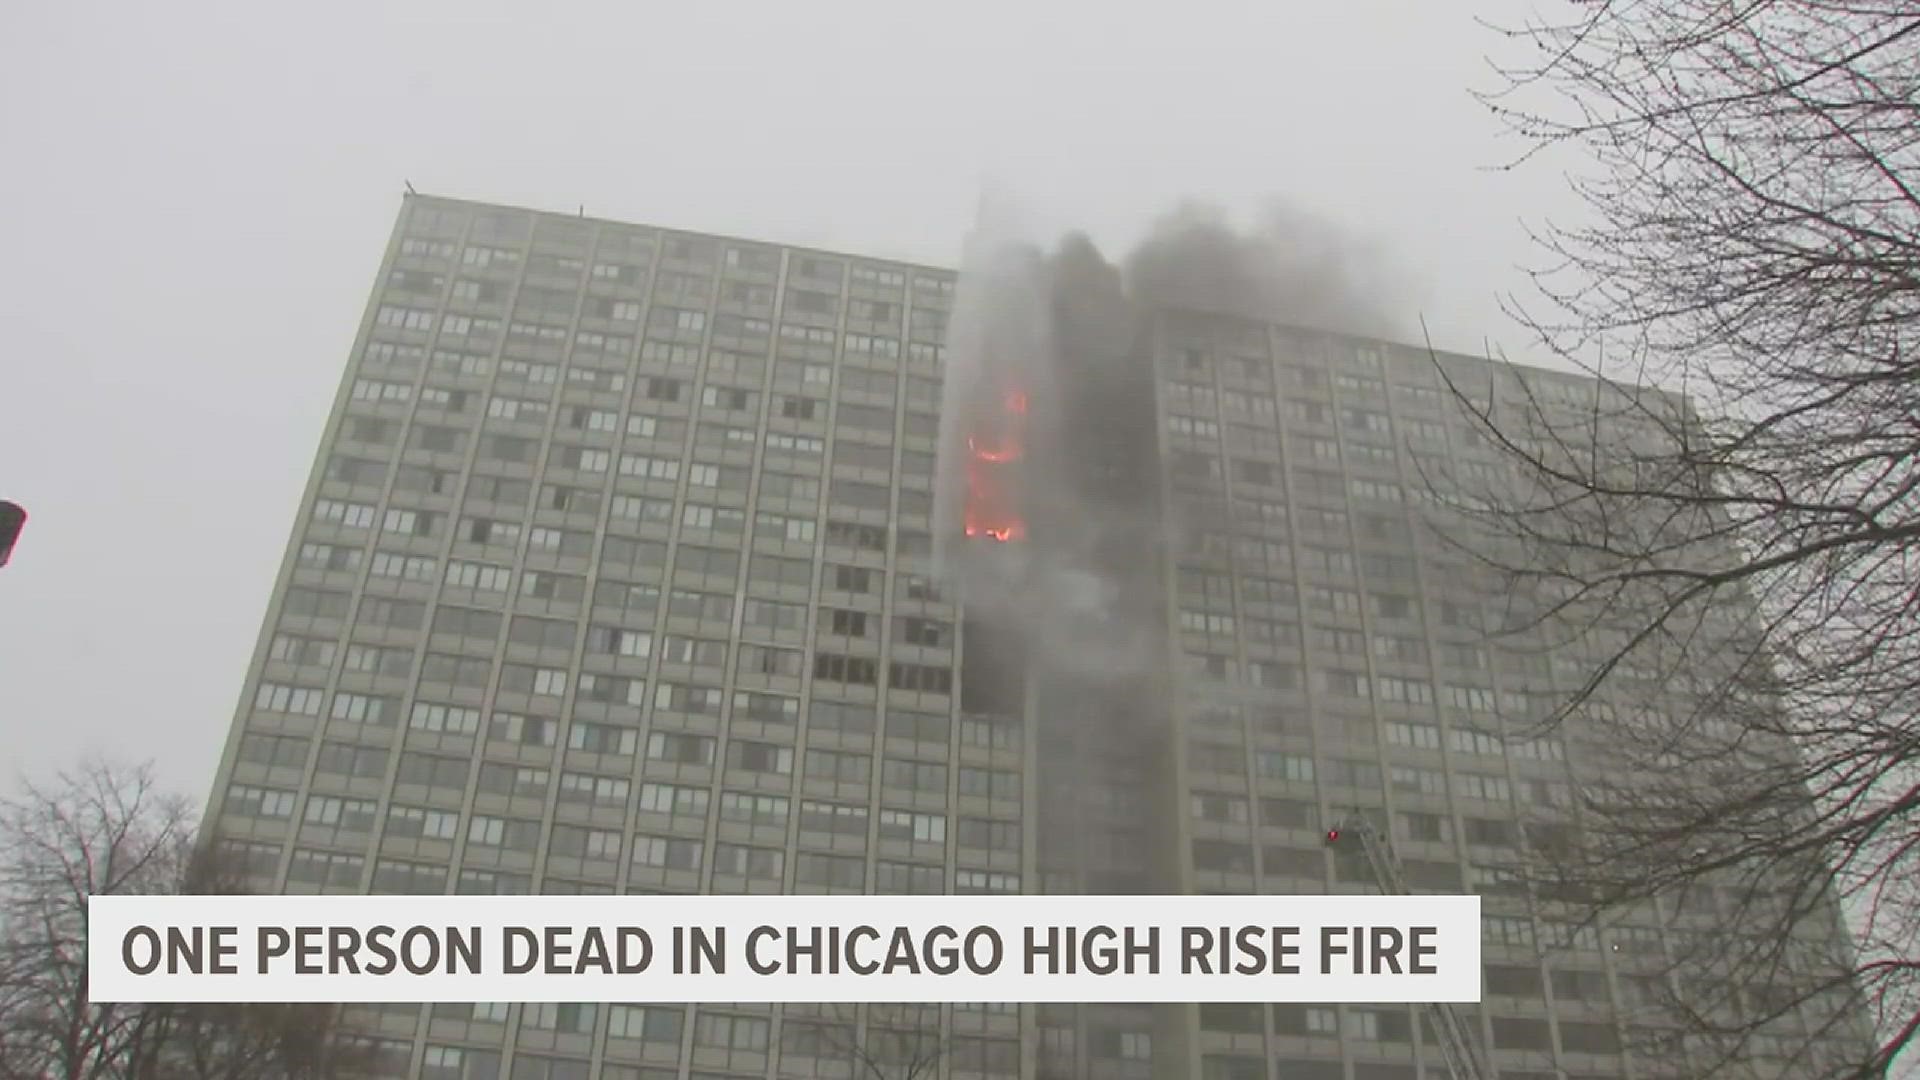 The Chicago Fire Commissioner says the fire began on the 15th floor and traveled up to the 24th floor as firefighters worked to put it out.